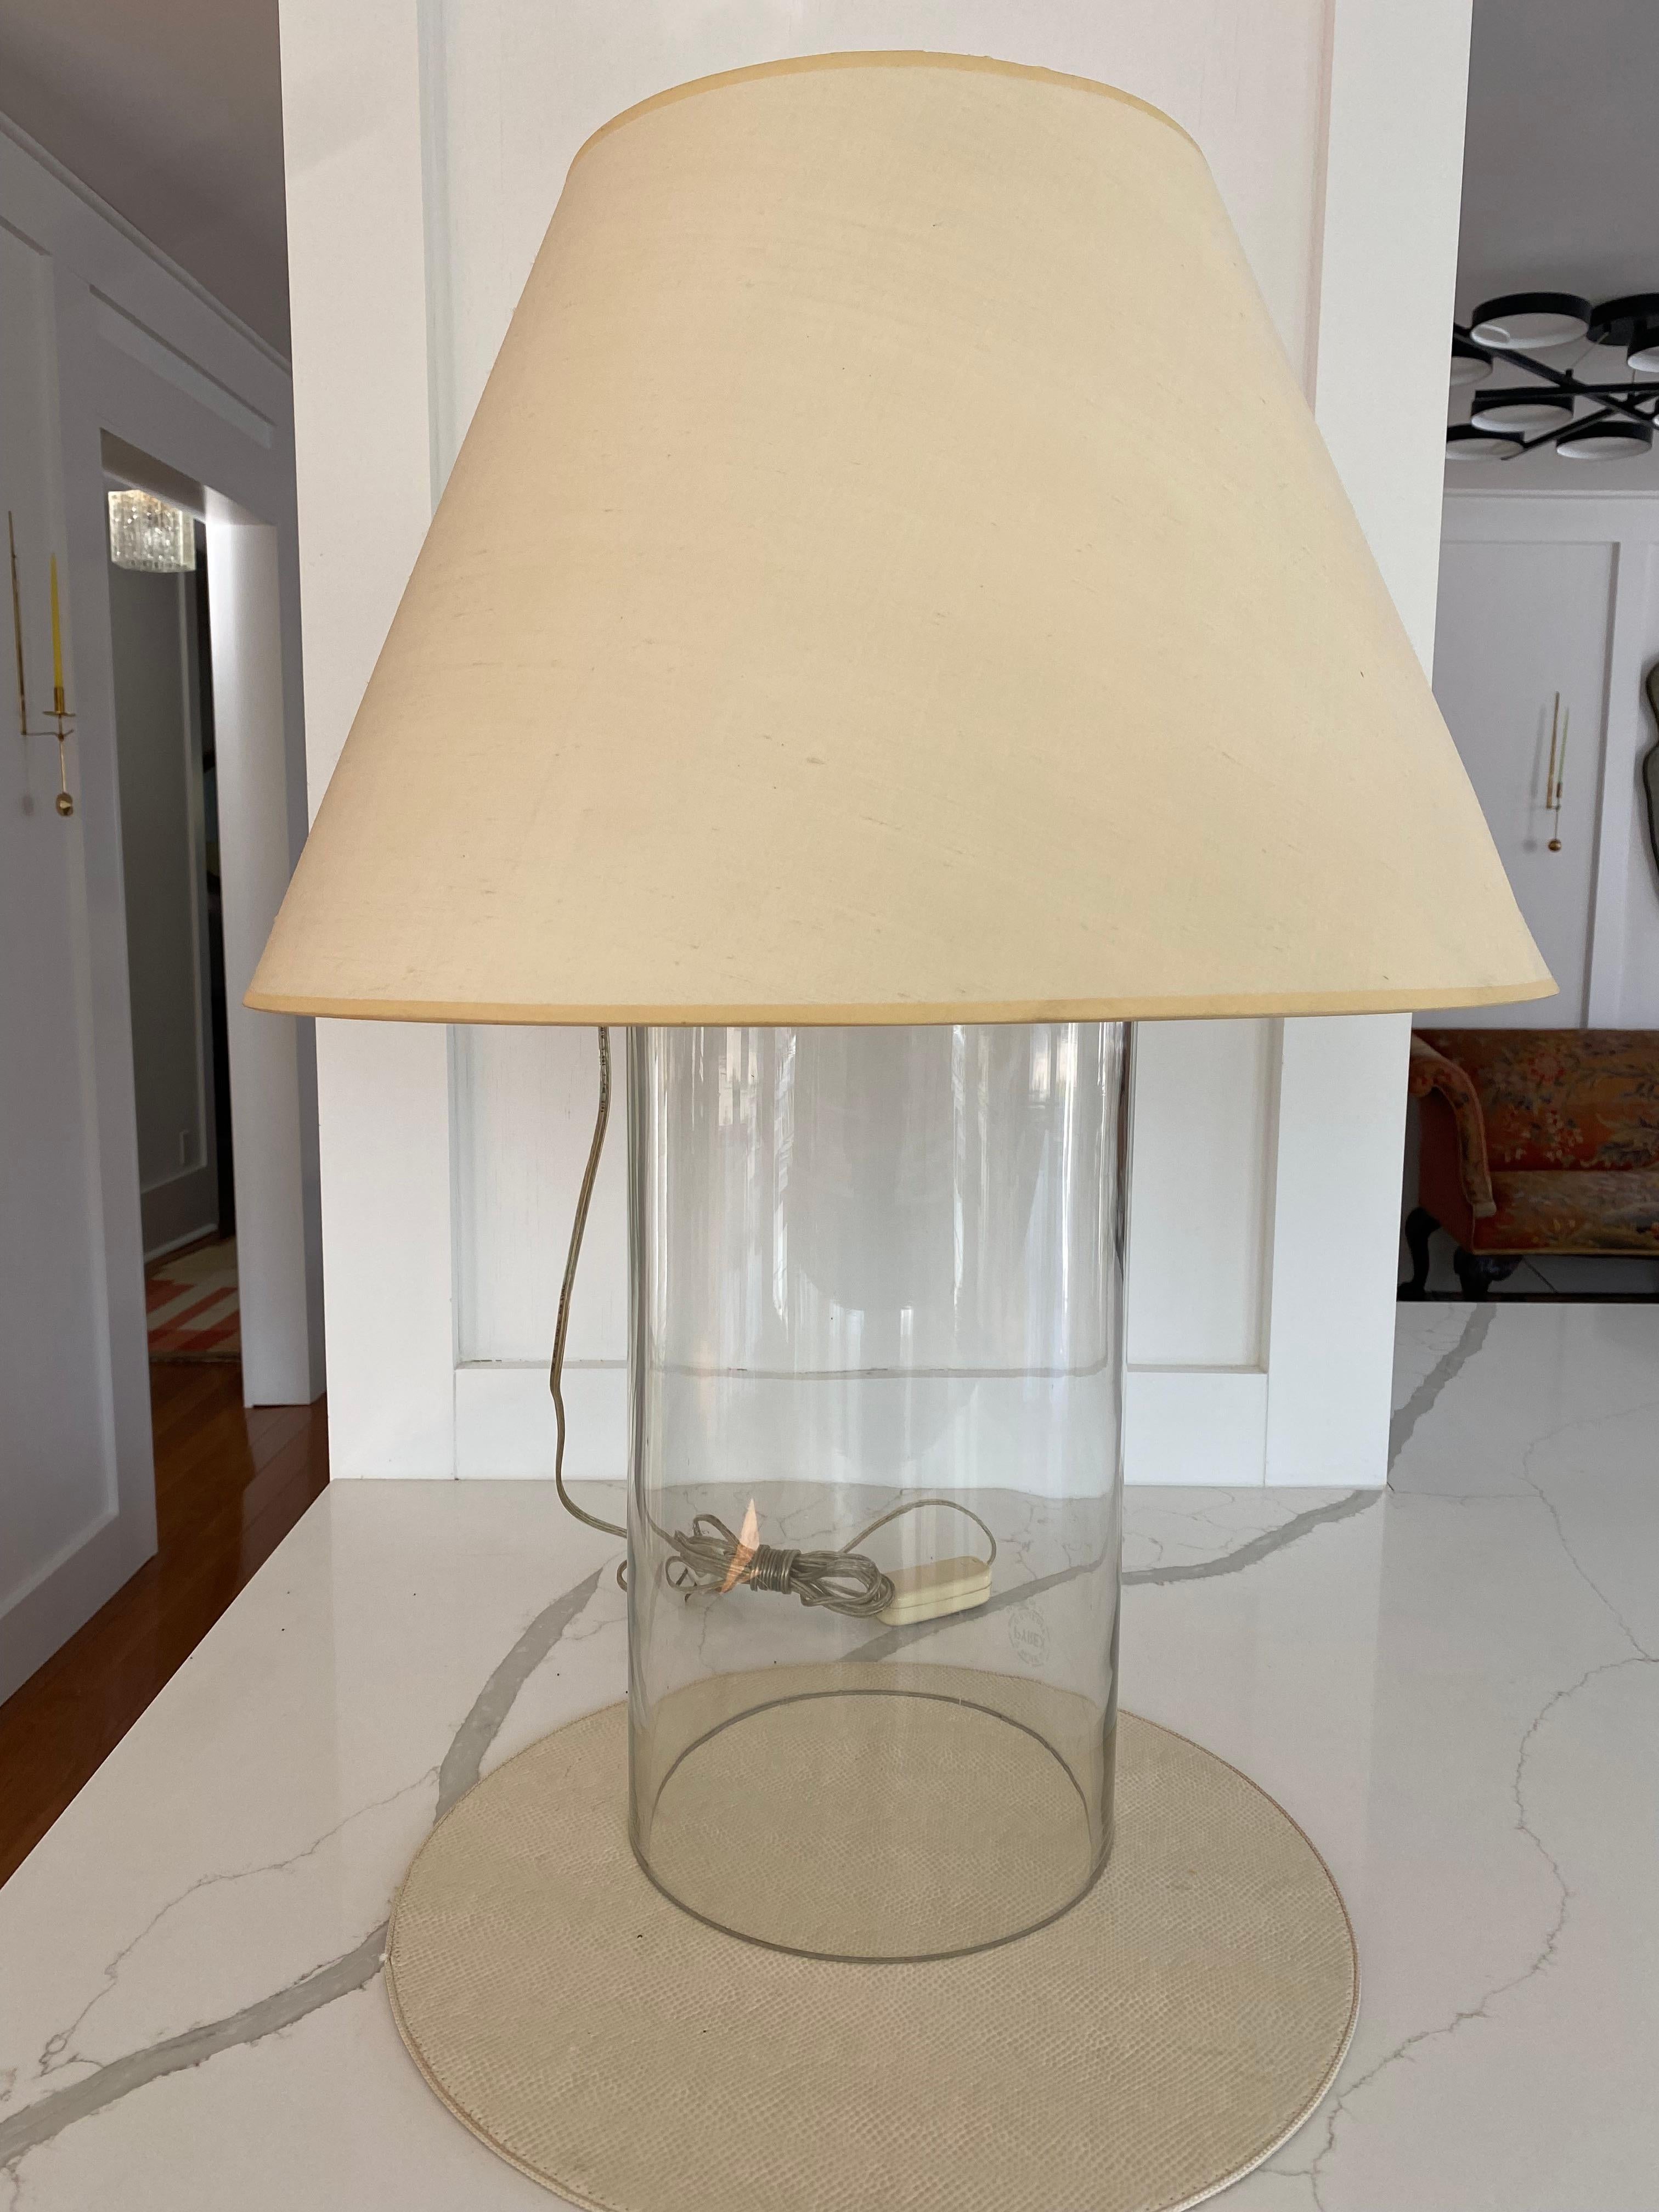 Pair of pyrex glass industrial style lamps that are simple and classic Model 999 by John Saladino. 
Shades not include - original shades approx 10 x 24 x 7 high.


